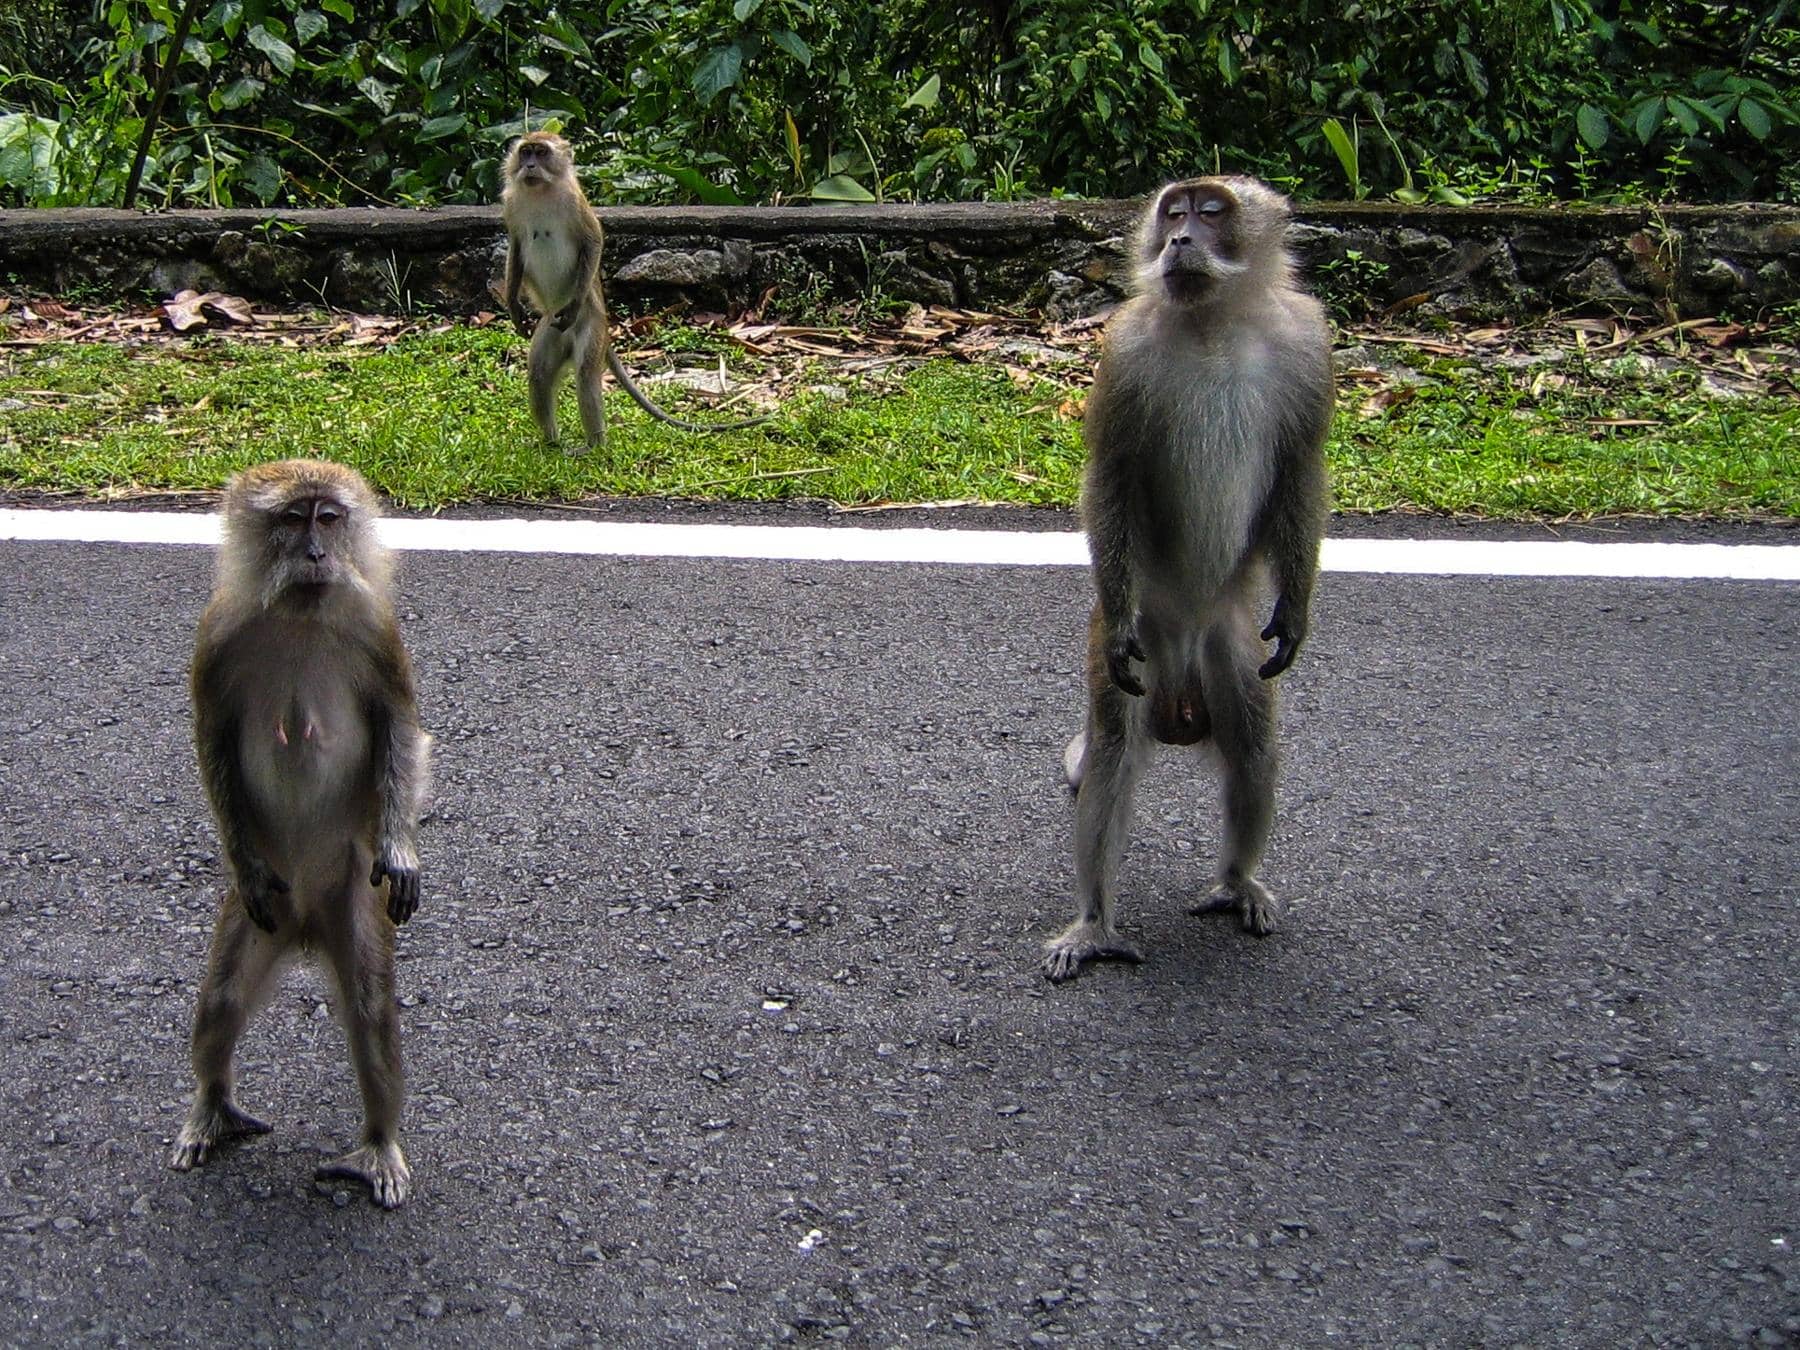 Kuala Lumpur: Tropical heat. Tons of monkeys. What more could you want?